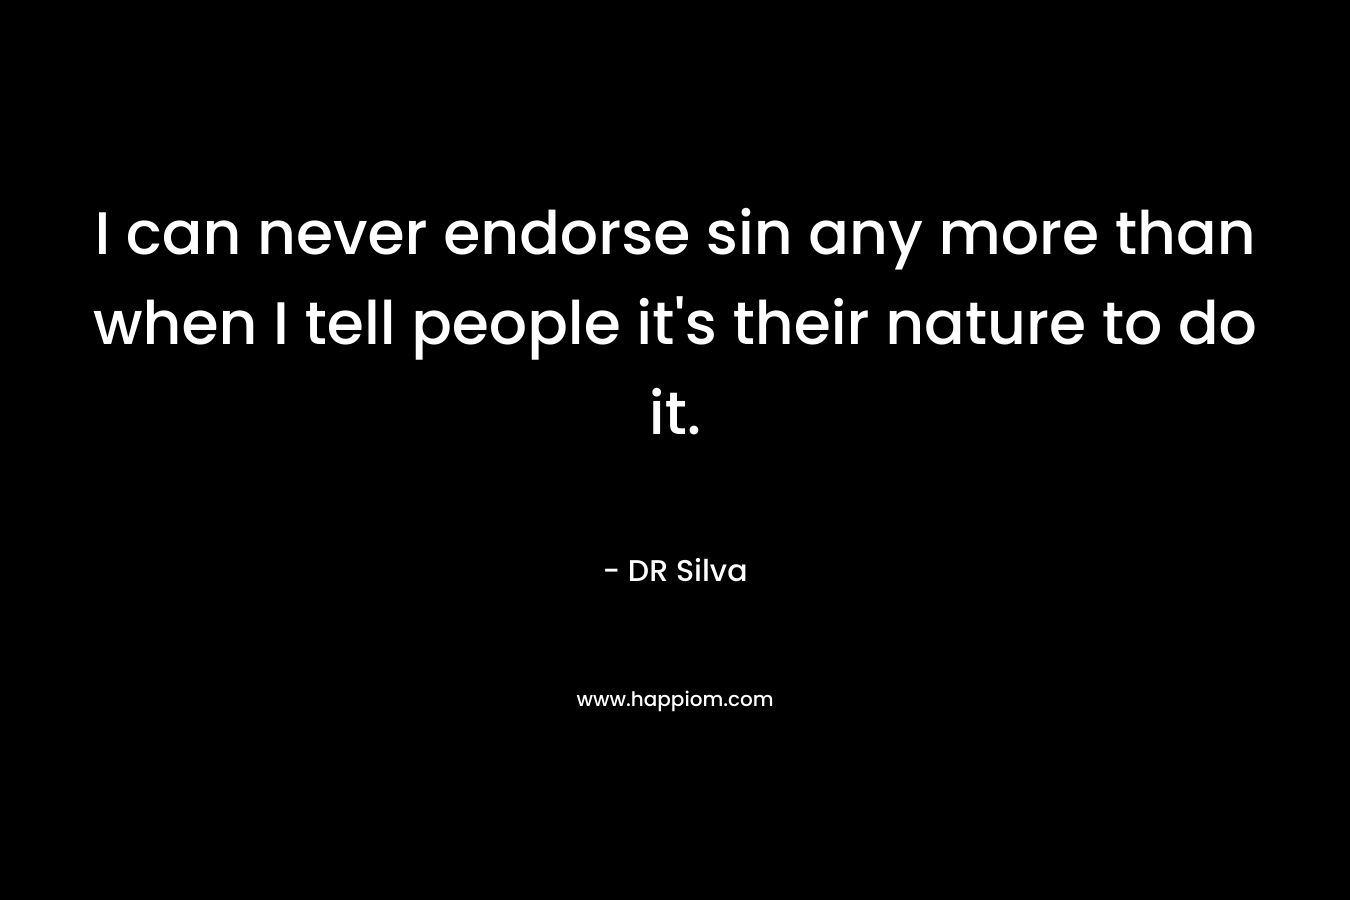 I can never endorse sin any more than when I tell people it’s their nature to do it. – DR Silva